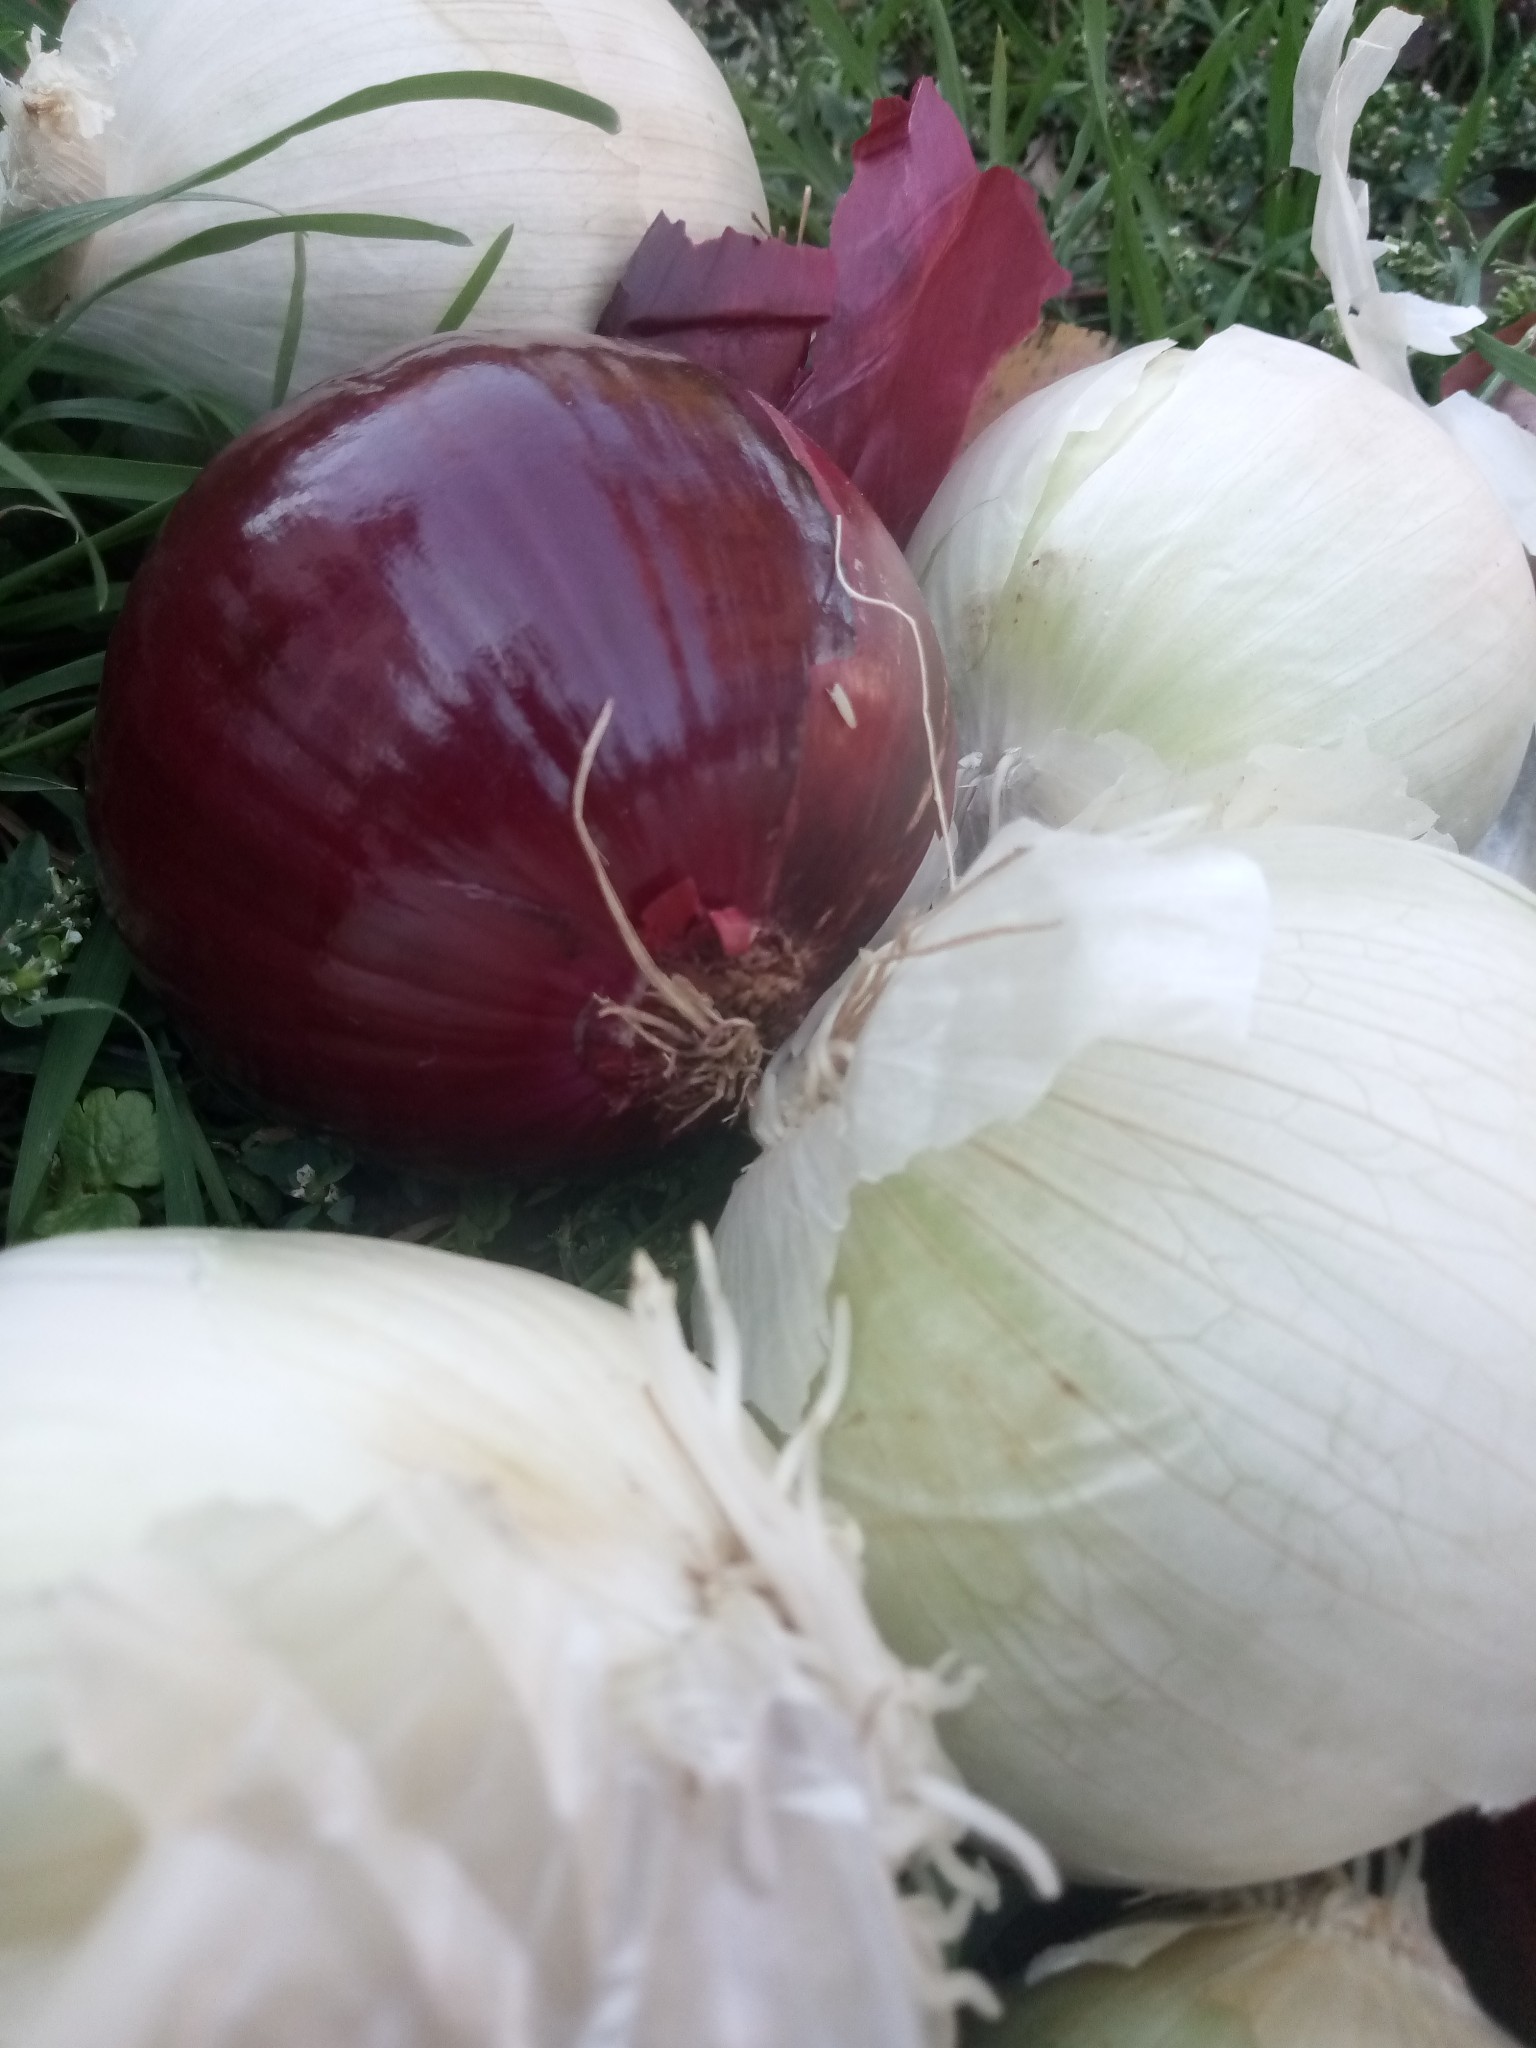 Red and white onion photo